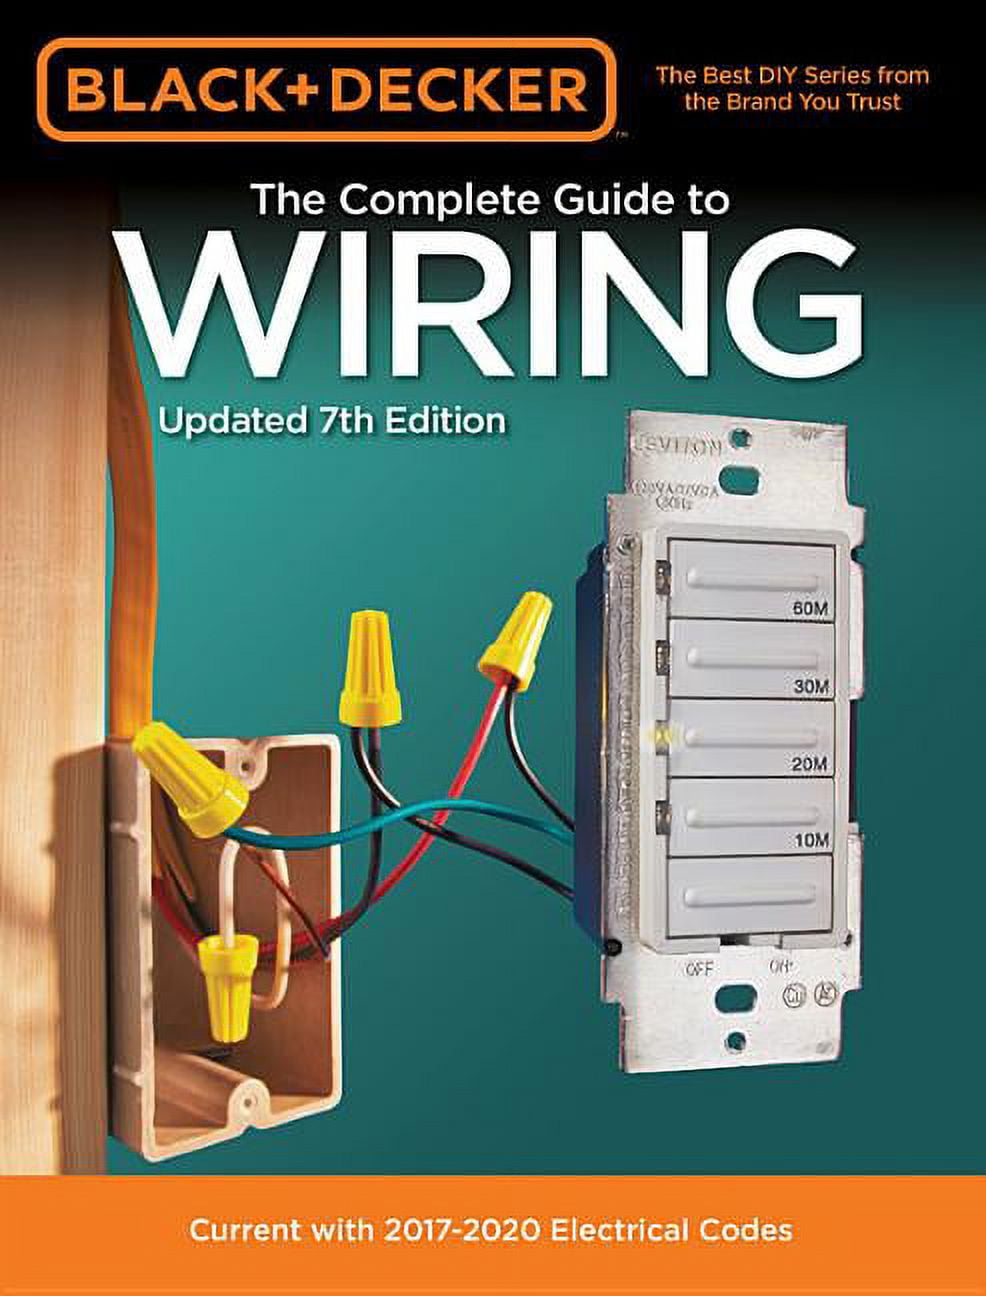 The Complete Guide to Home Wiring: A Comprehensive Manual, from Basic  Repairs to Advanced Projects (Black & Decker Home Improvement Library; U.S.  edition): Black & Decker, international, The Editors of Creative Publishing